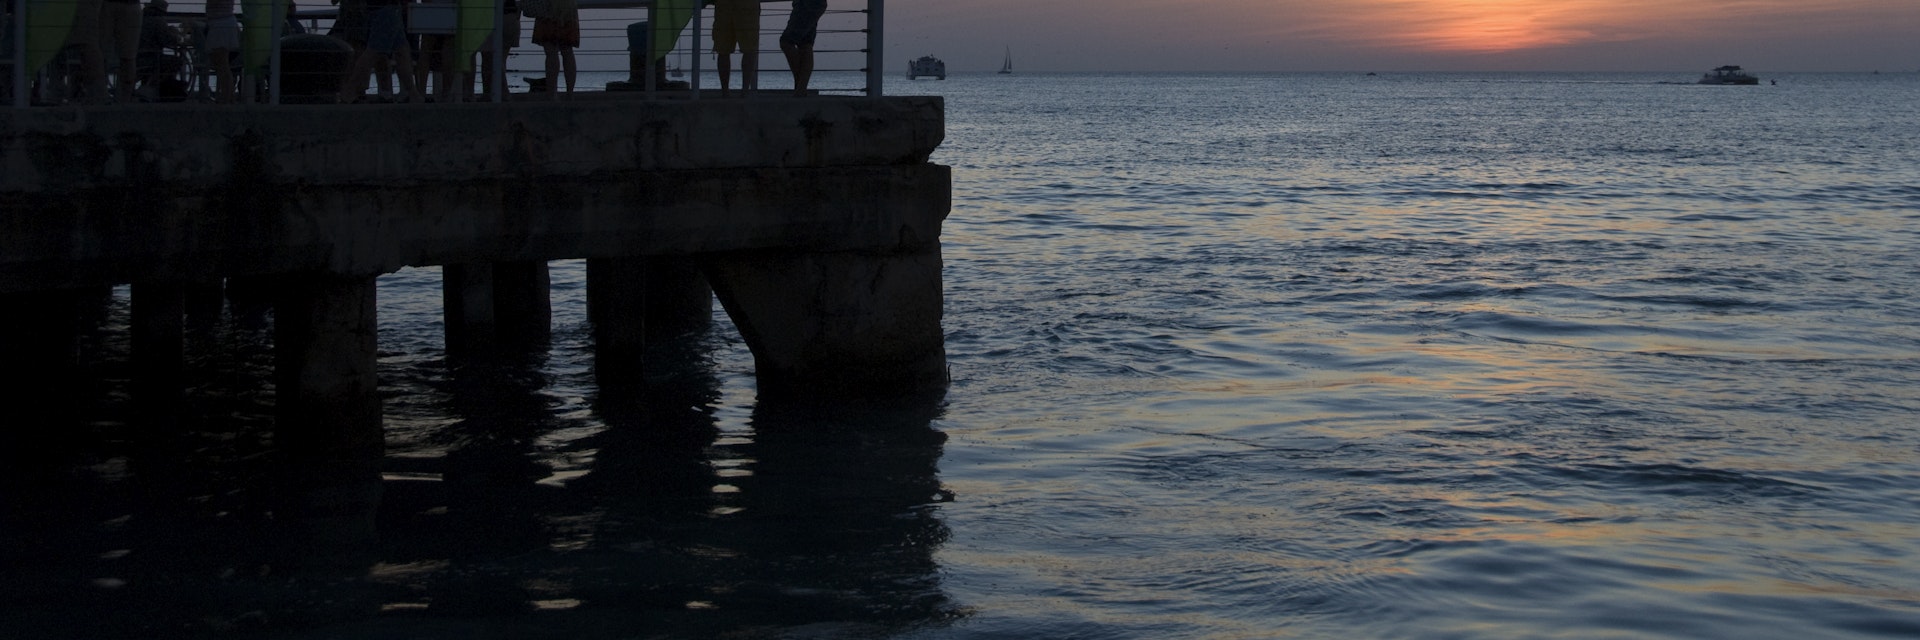 Tourists and locals enjoy cocktails while viewing the sunset from pier at Mallory Square.